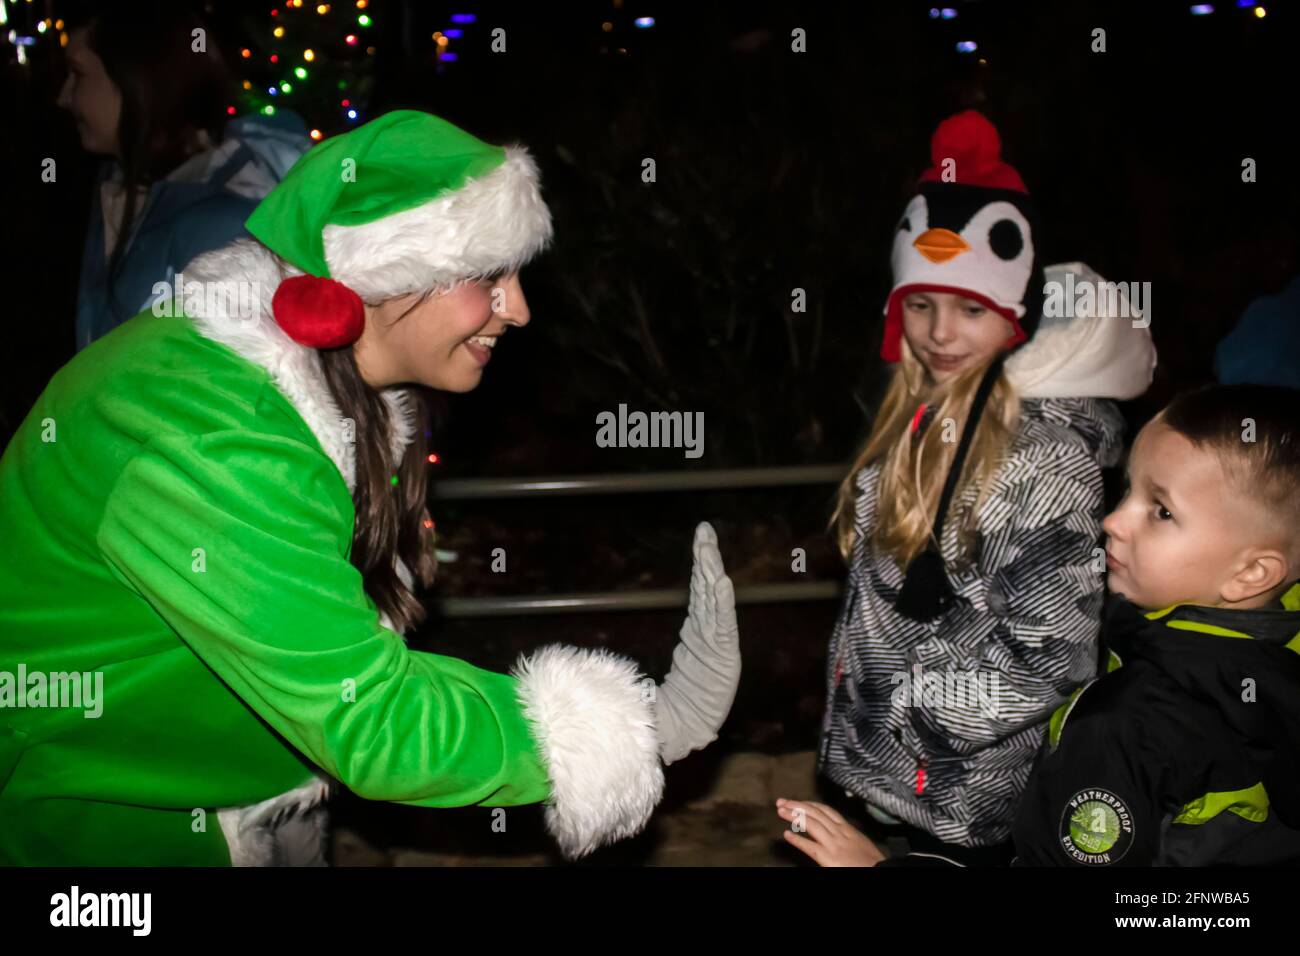 12-15 2018 Tulsa USA Female employee dressed as green elf high fives unsure little boy at Gathering Place public park at nighttime festivities -select Stock Photo